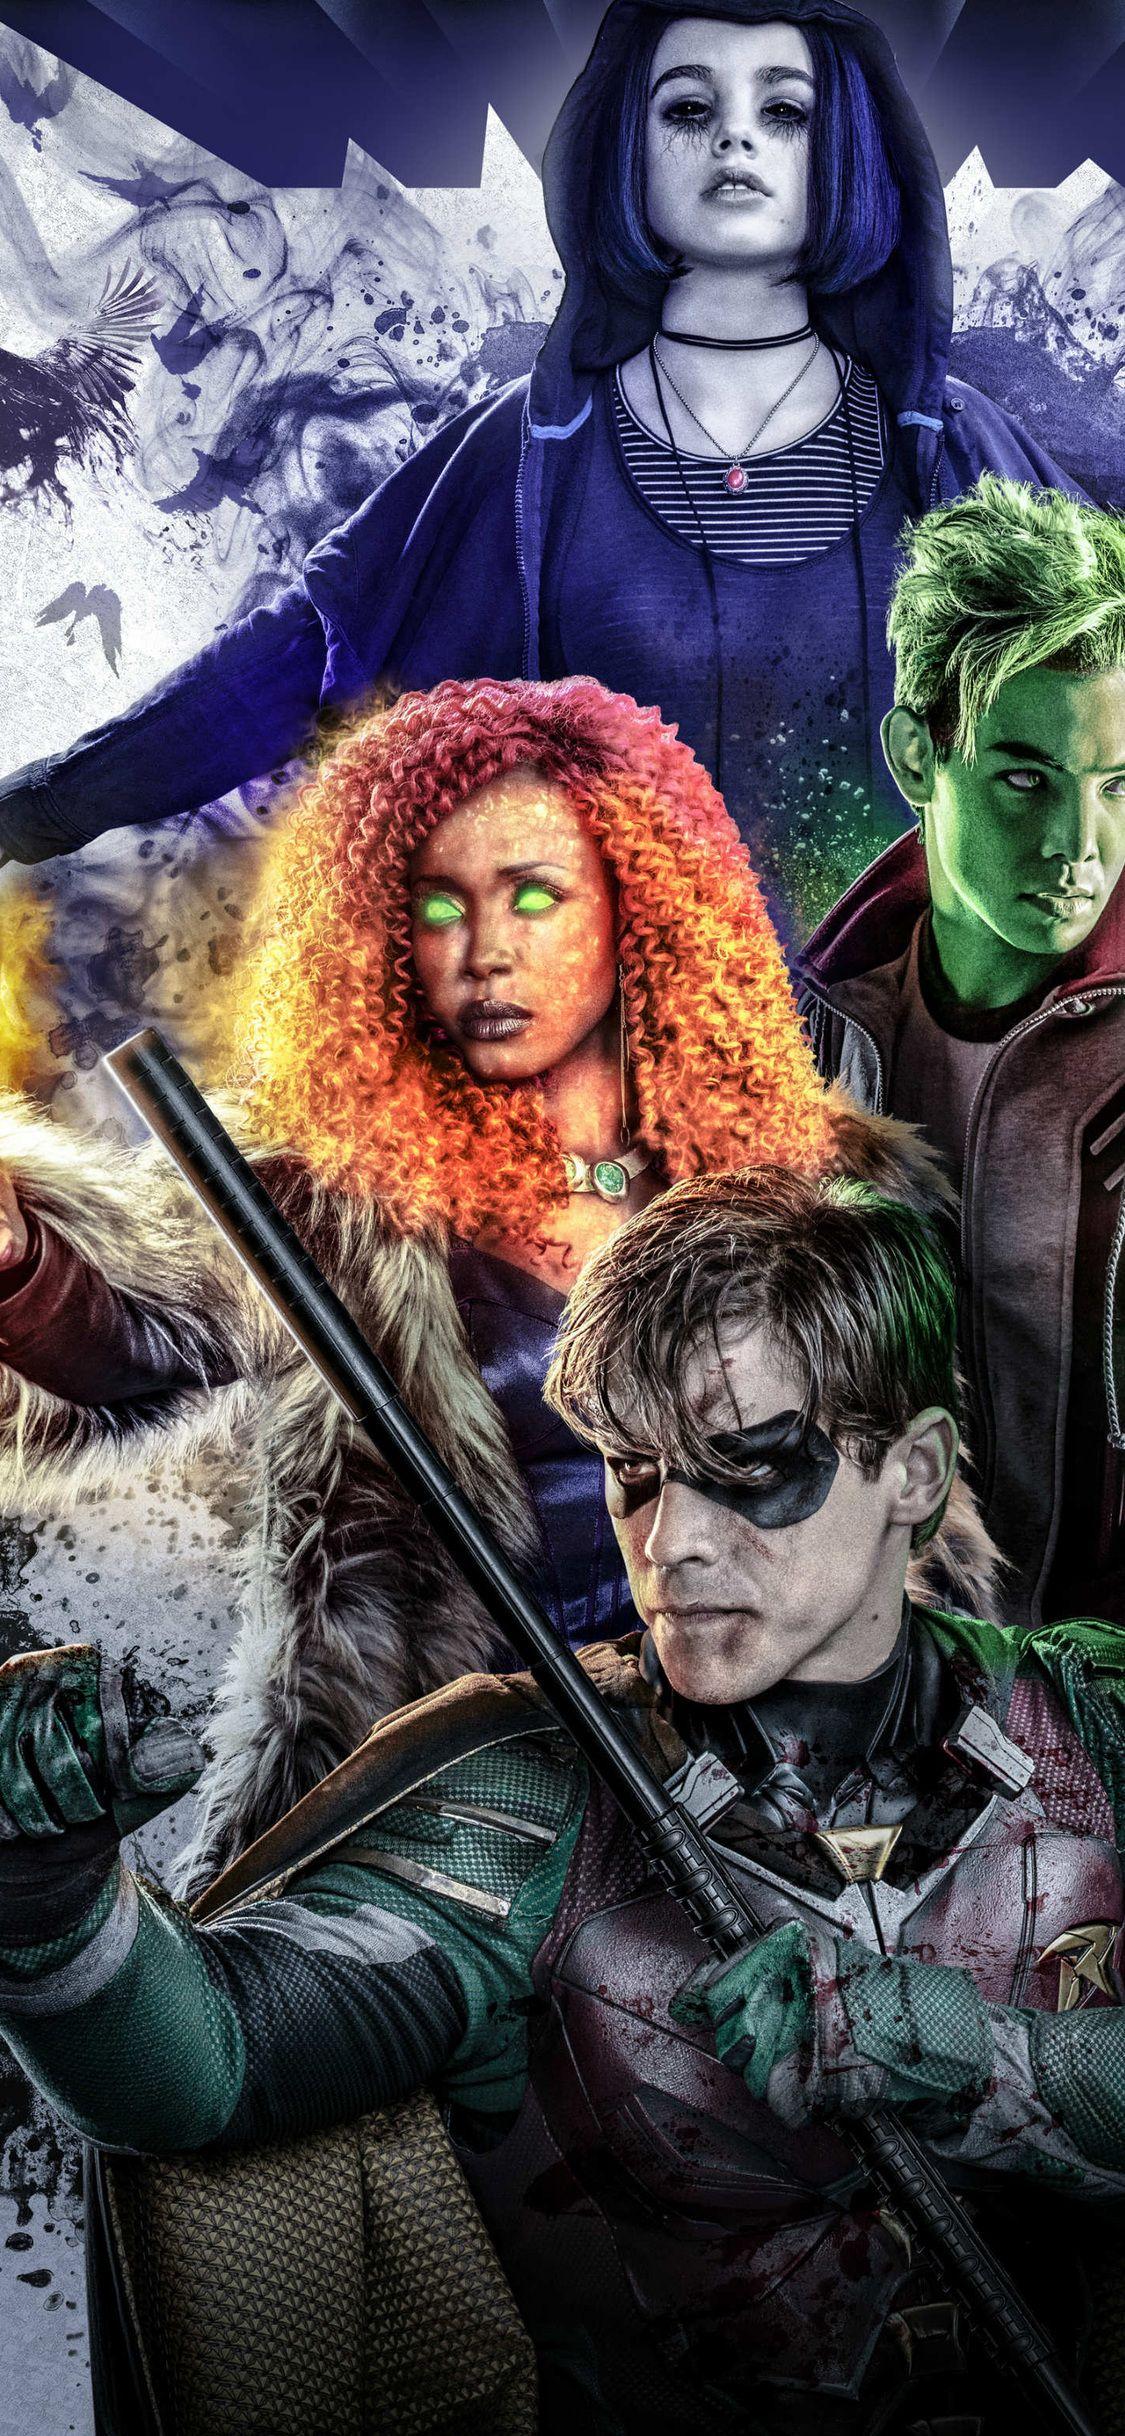 Beast Boy Raven And Starfire In Titans 2018 iPhone XS, iPhone iPhone X HD 4k Wallpaper, Image, Background, Photo and. Beast boy, Starfire, Titans